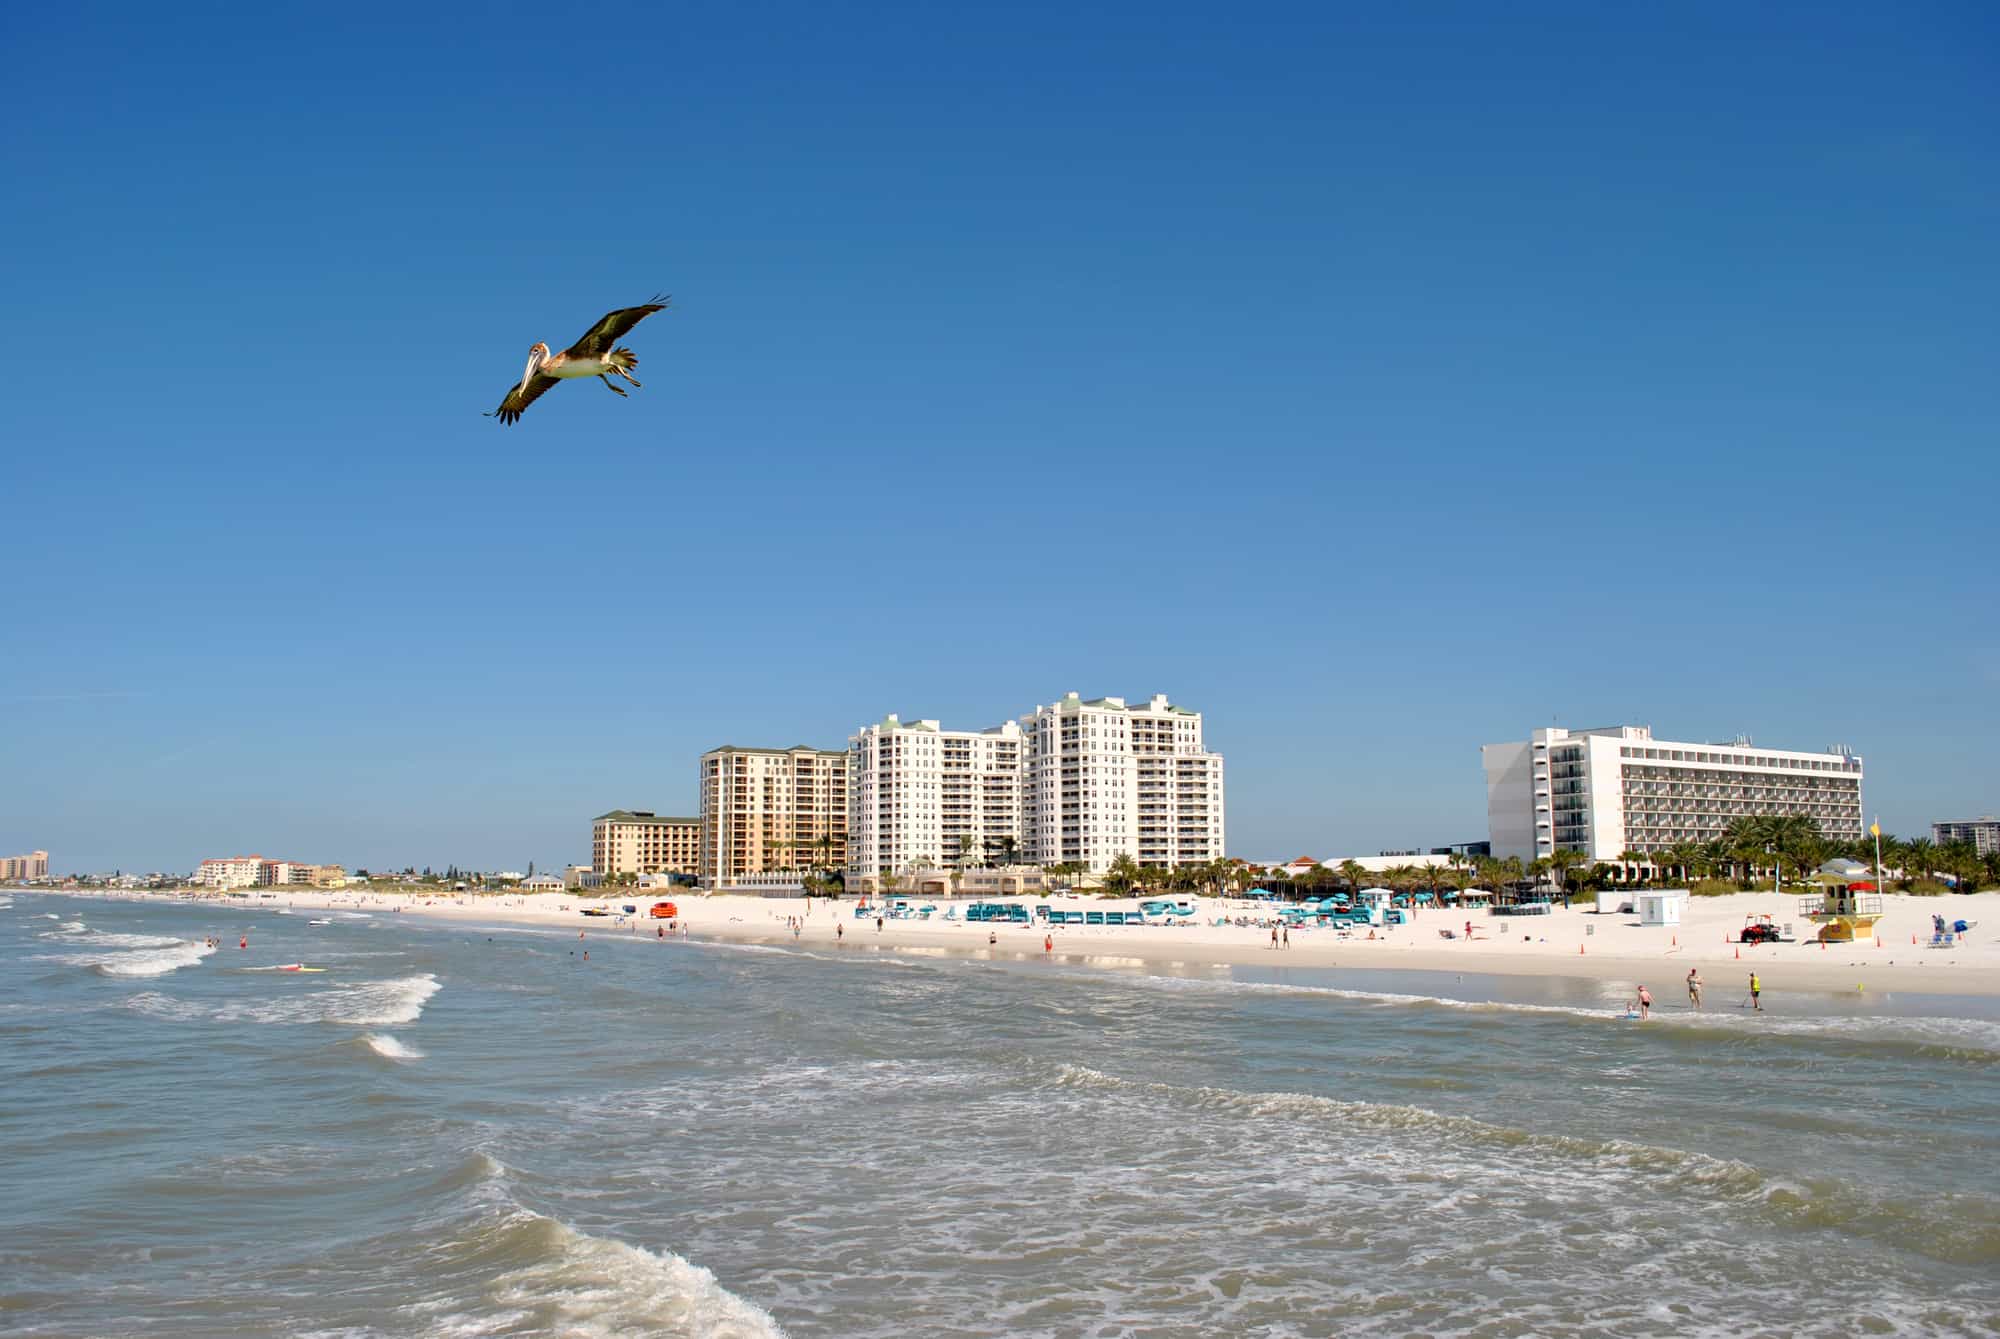 Beach, ocean, and hotels In Clearwater Beach, Florida